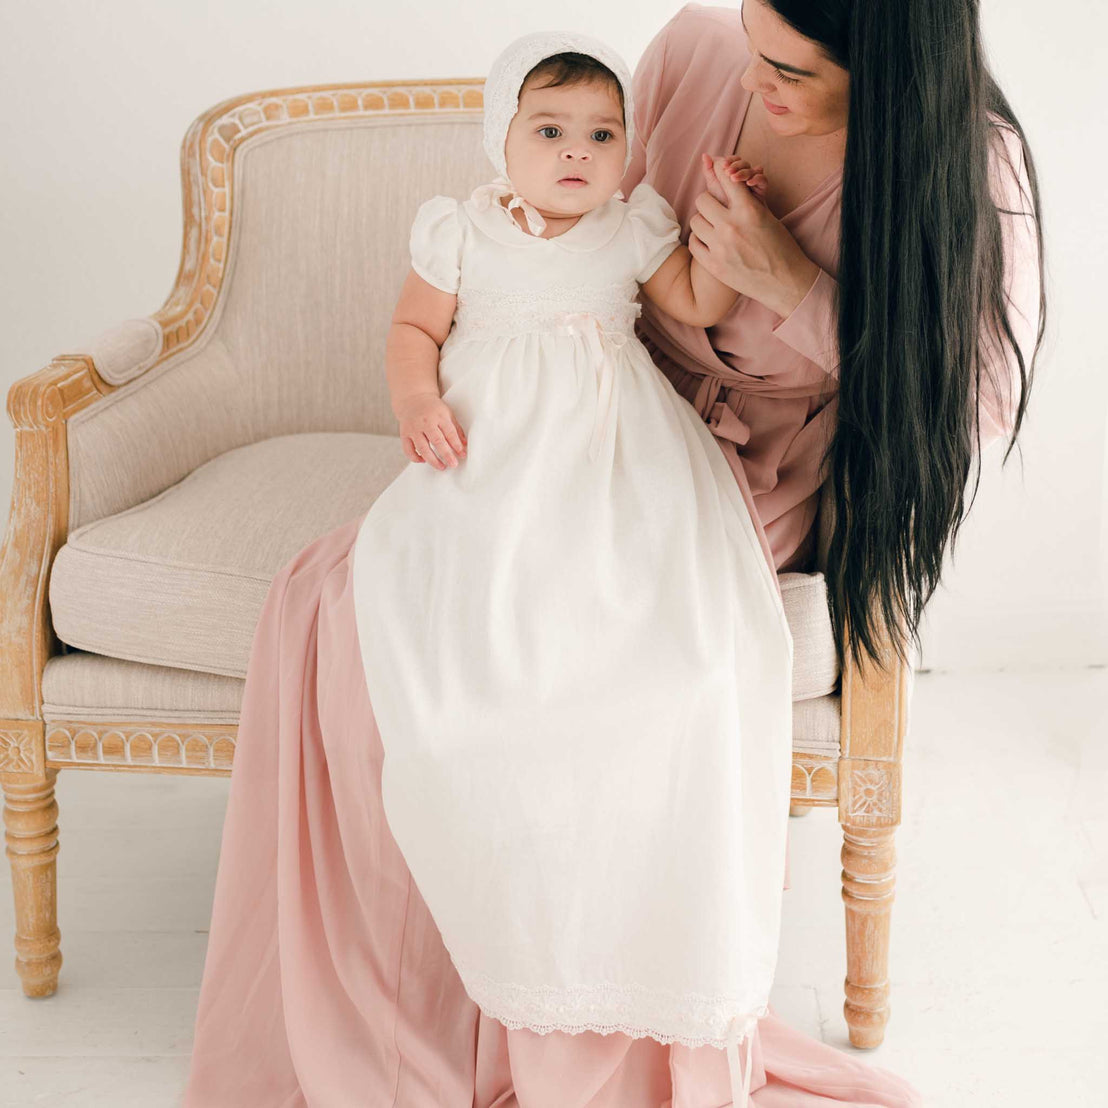 A woman comforts a baby in a long white gown sitting on an upscale beige armchair in a white room during a baptism.